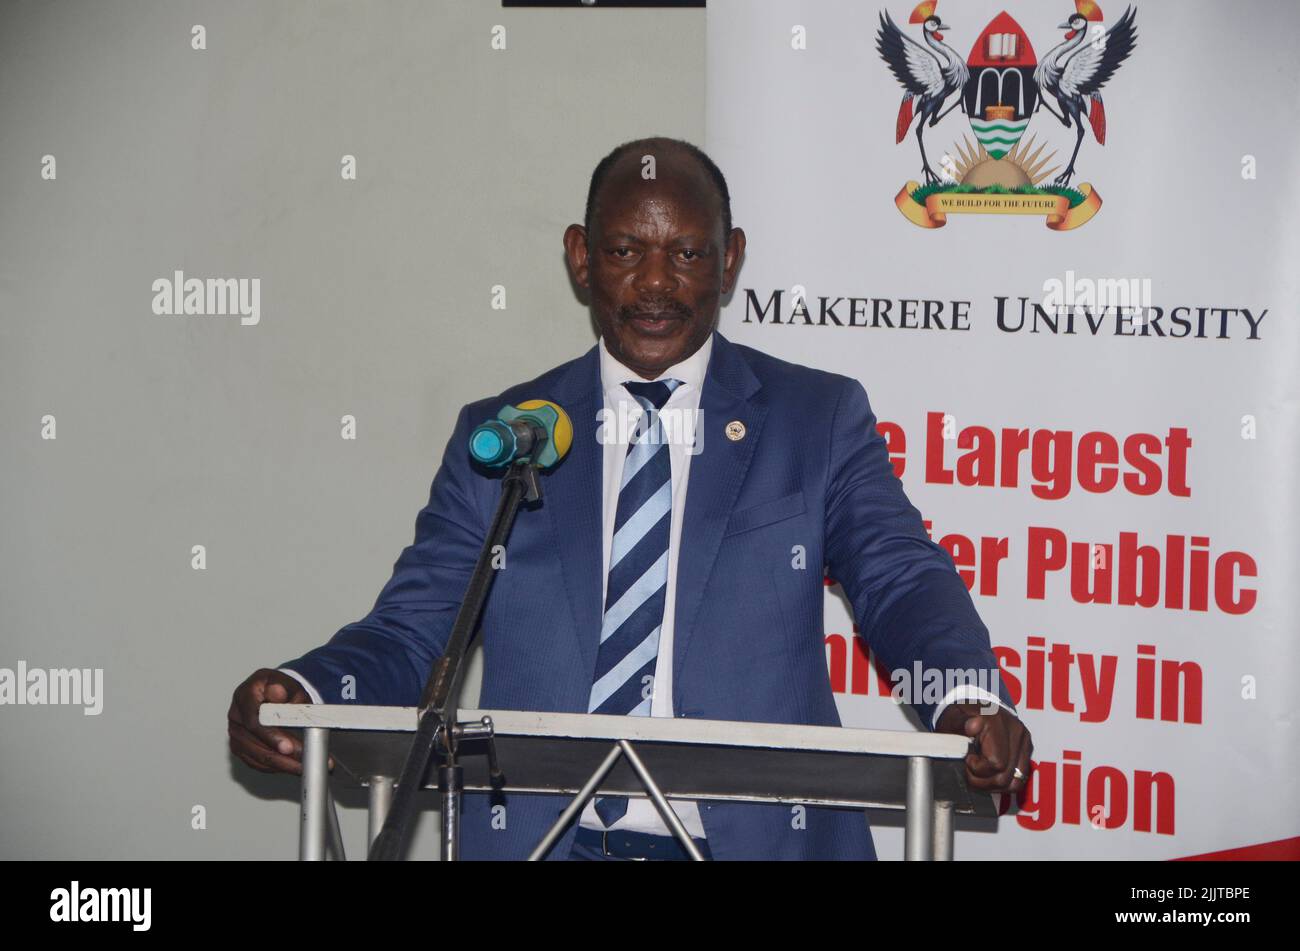 Kampala, Uganda. 26th July, 2022. Barnabas Nawangwe, vice chancellor of Makerere University, speaks during the 2022 'Chinese Ambassador Scholarship of Excellence and Friendship' awarding ceremony at the university in Kampala, Uganda, July 26, 2022. China on Tuesday offered scholarships to 24 students in a ceremony at Uganda's Makerere University. The scholarships, according to the university, are intended to help students who are economically underprivileged but are outstanding academically and of good character. Credit: Nicholas Kajoba/Xinhua/Alamy Live News Stock Photo